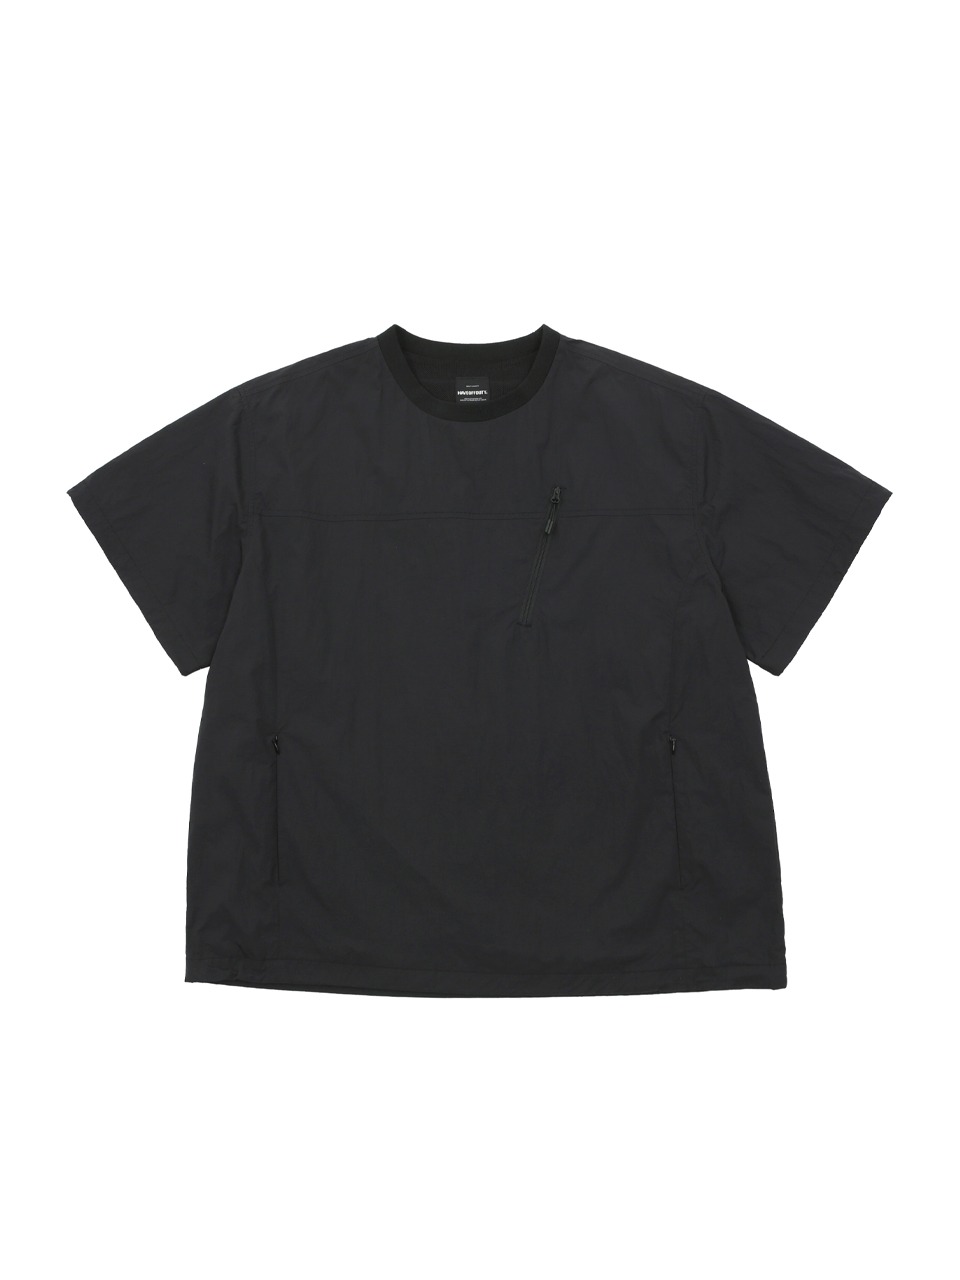 HAVEOFFDUTY - AUTHENTIC T-SHIRTS (BLACK)